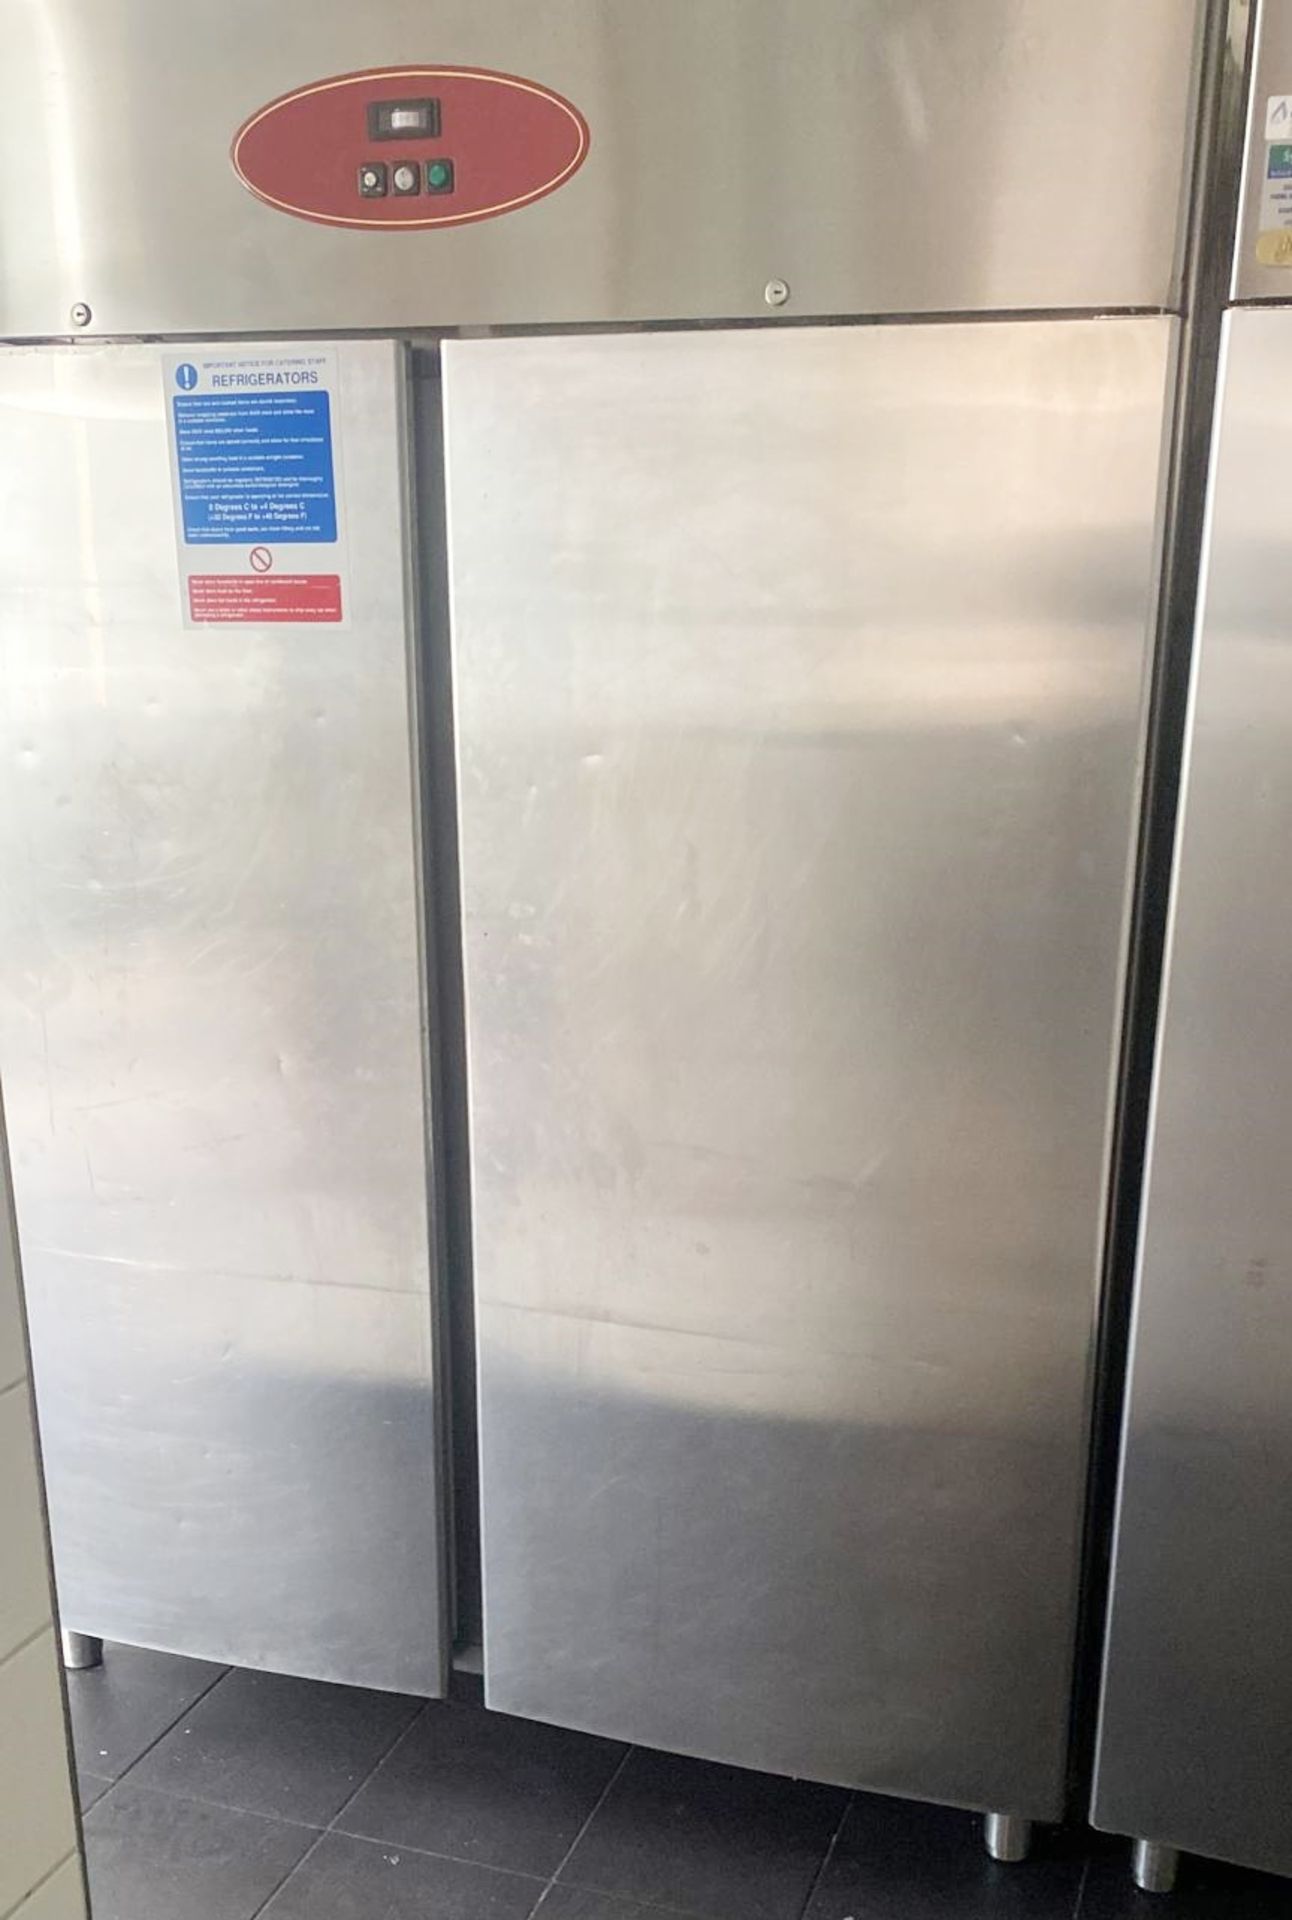 1 x Commercial Double Door Upright Refrigerator With Stainless Steel Exterior - Branded By Zoppas - Image 5 of 6